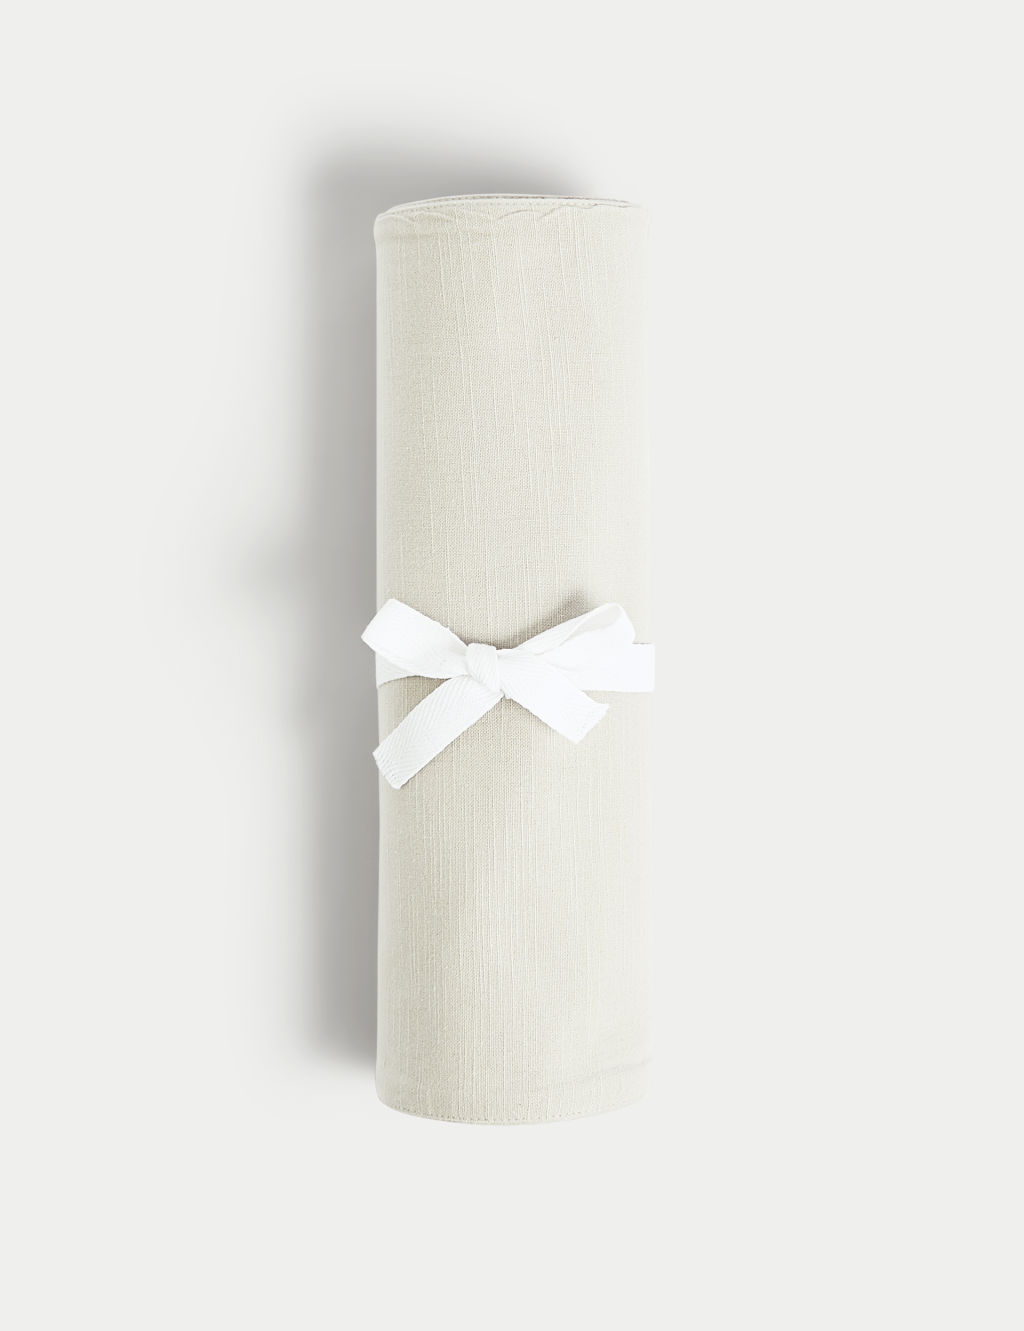 Pure Cotton Ruffle Table Runner 1 of 3